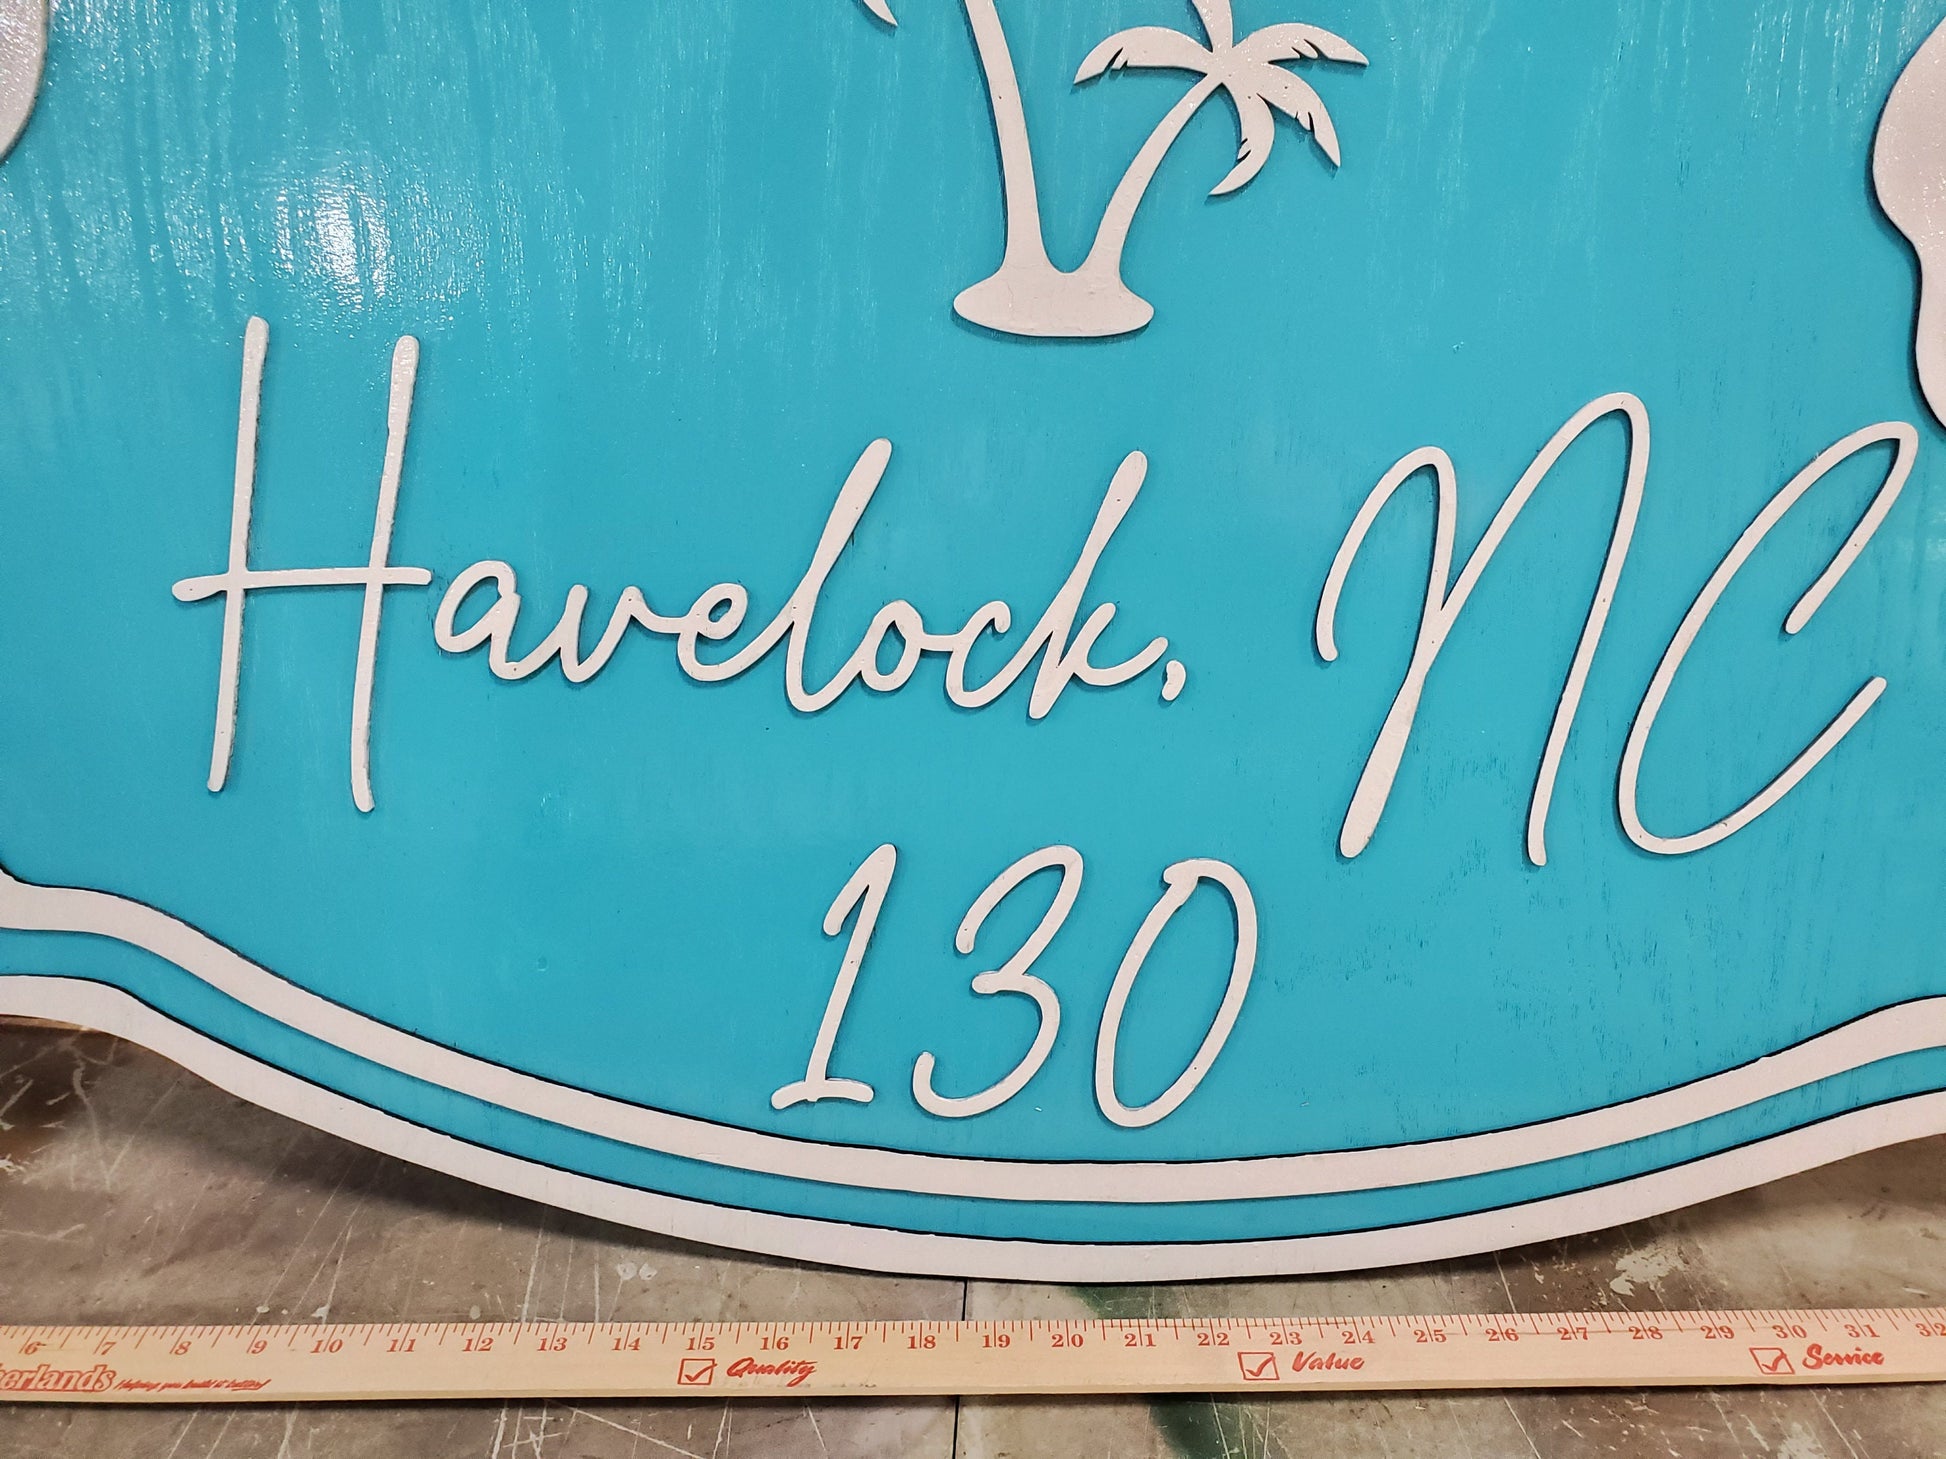 Large Beach House Sign Mermaid Bay Ocean Address Established Sign Exterior Outdoor 3D Raised Text Teal White Shabby Chic Nautical